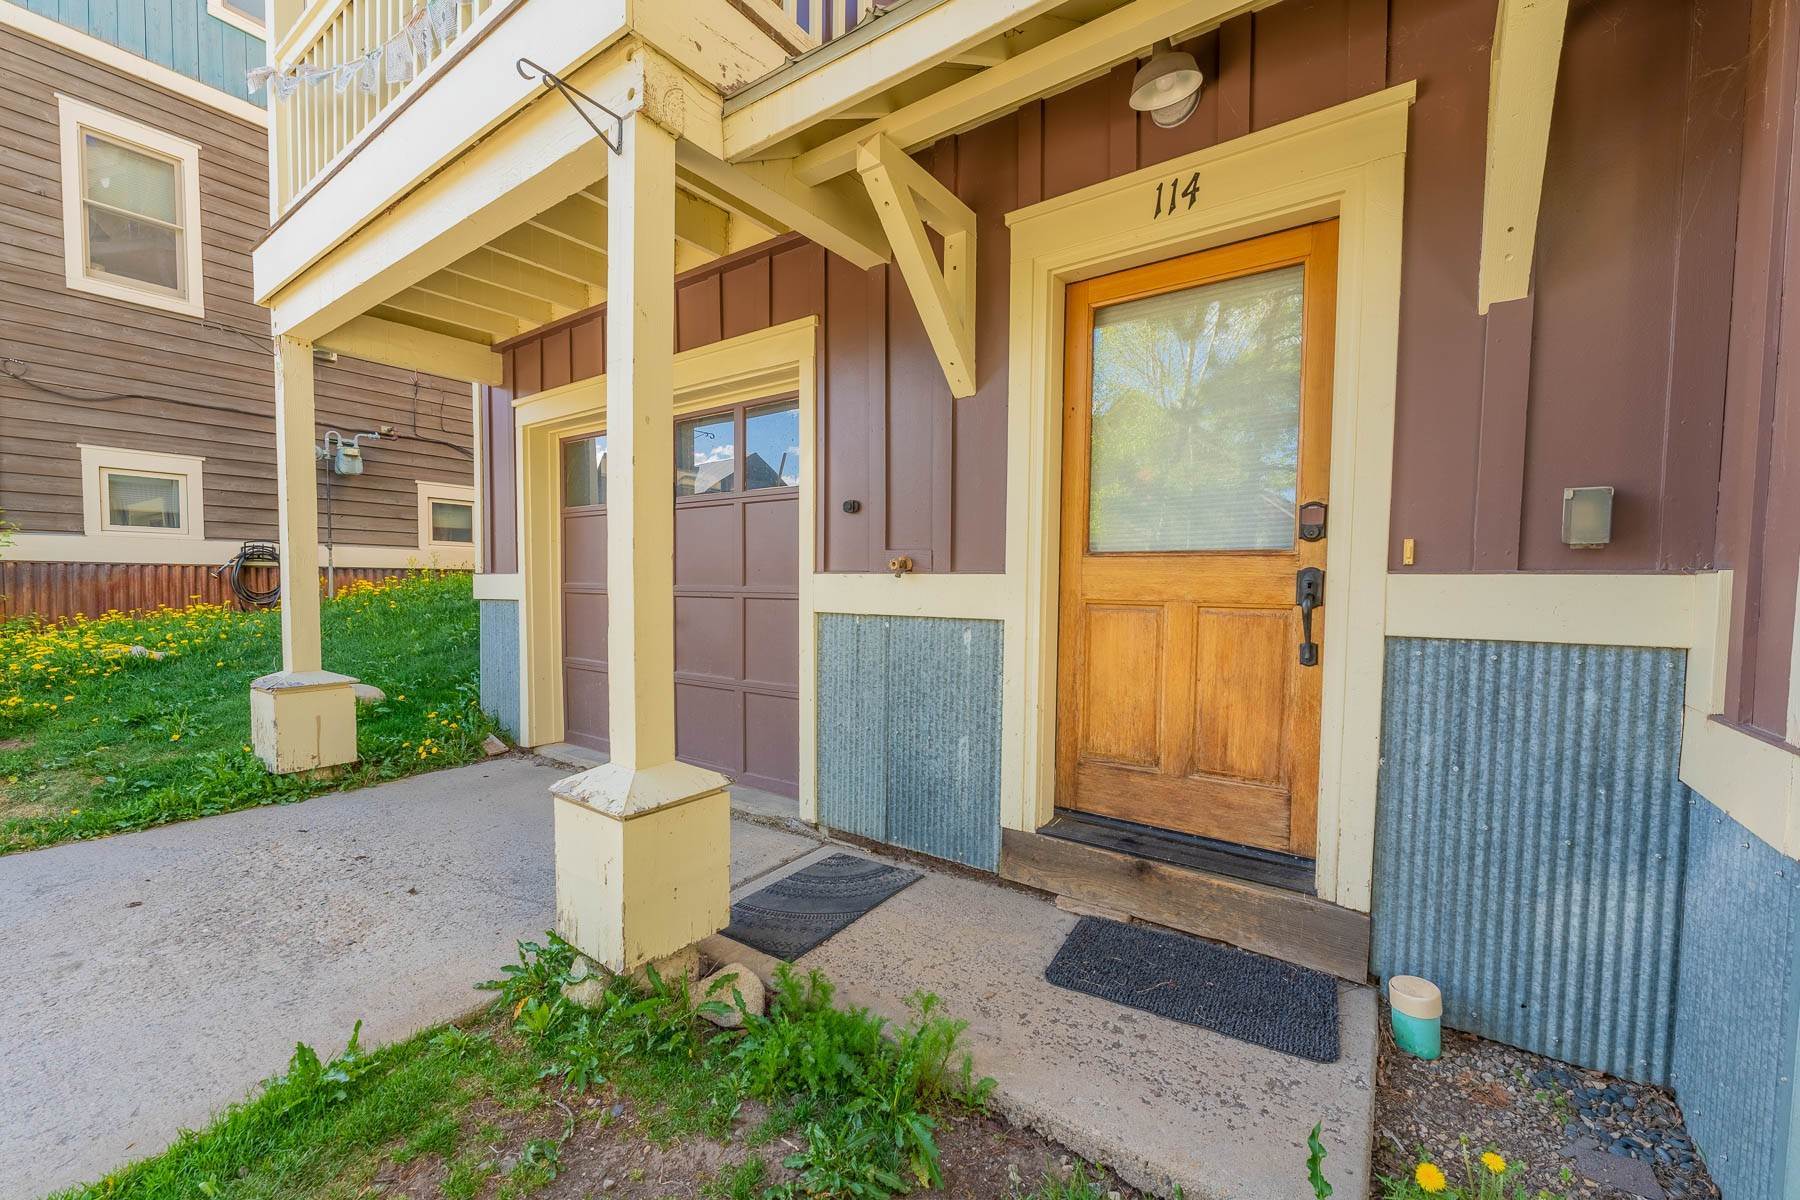 4. Townhouse for Sale at Located in the Highly Desirable Pitchfork Neighborhood - Mt. Crested Butte 114 Big Sky Drive, Unit A Mount Crested Butte, Colorado 81225 United States